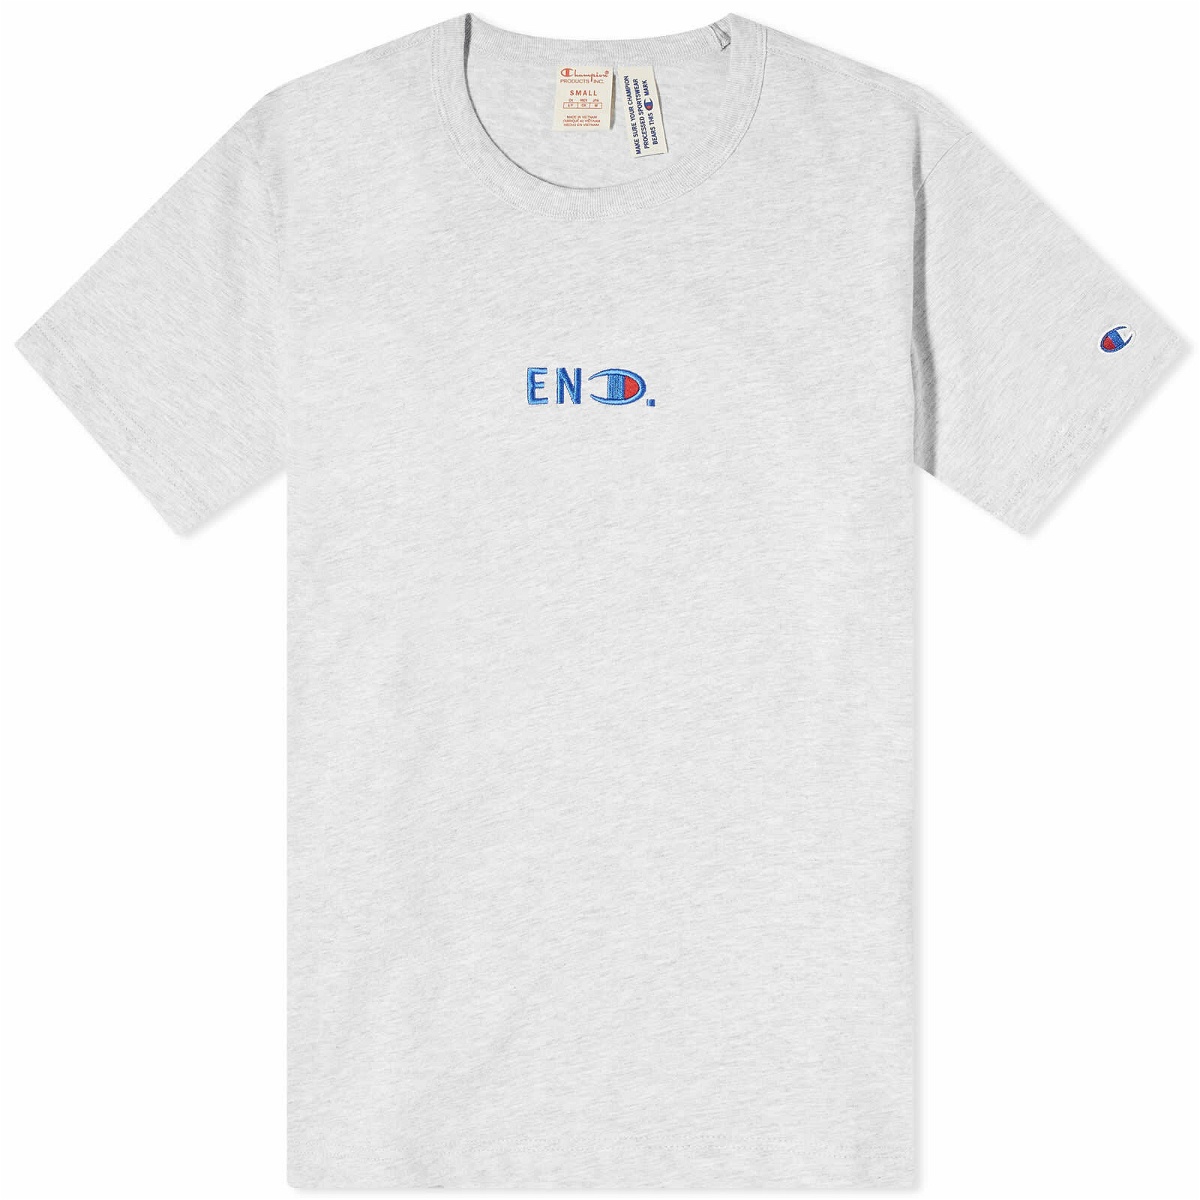 END. x Champion Reverse Weave T-Shirt in Grey Marl Champion Reverse Weave